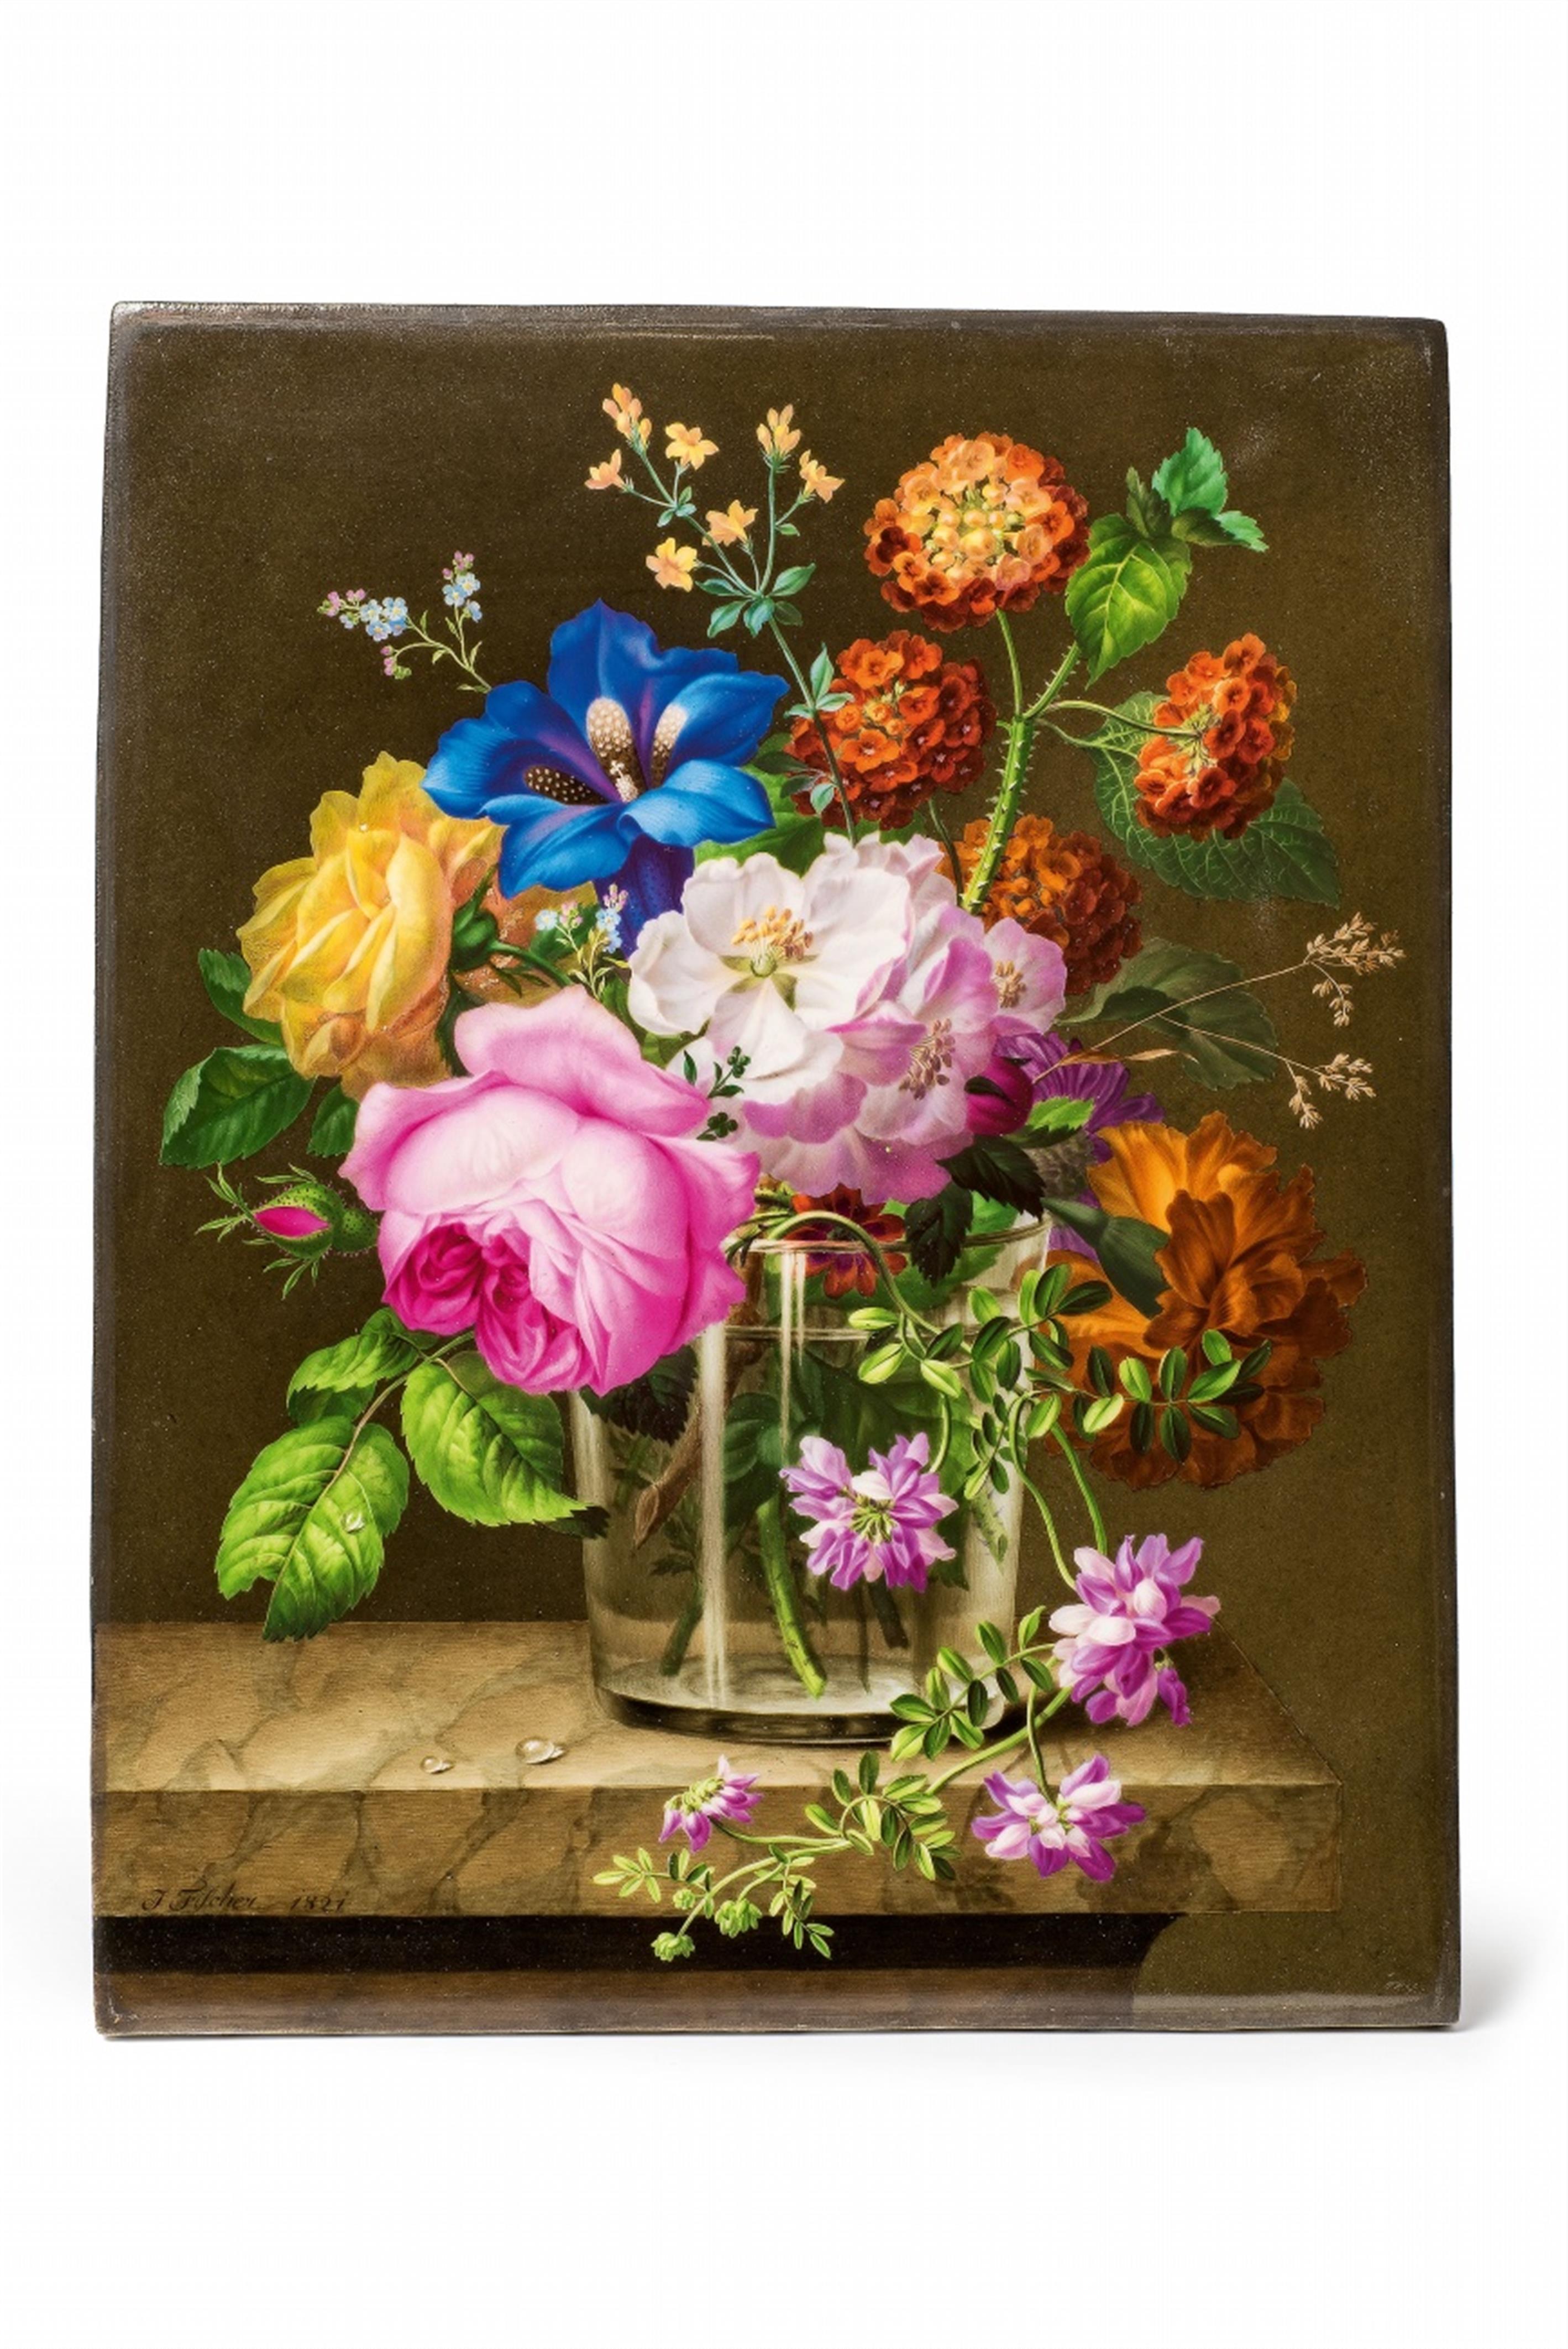 A signed painted porcelain plaque with a vase of flowers - image-1